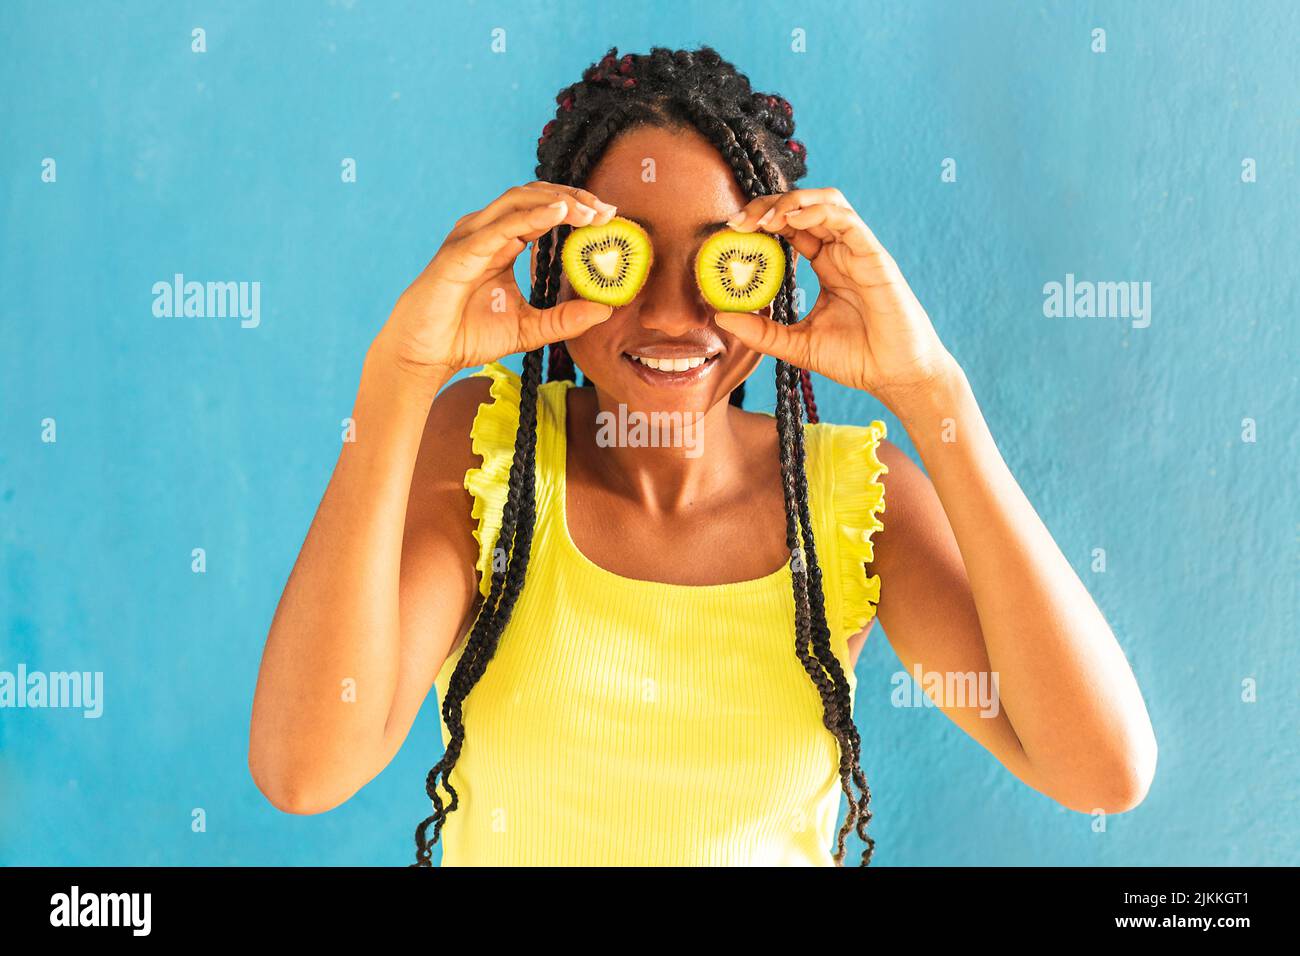 A cheerful young mixed race female holding kiwis in front of her eyes Stock Photo